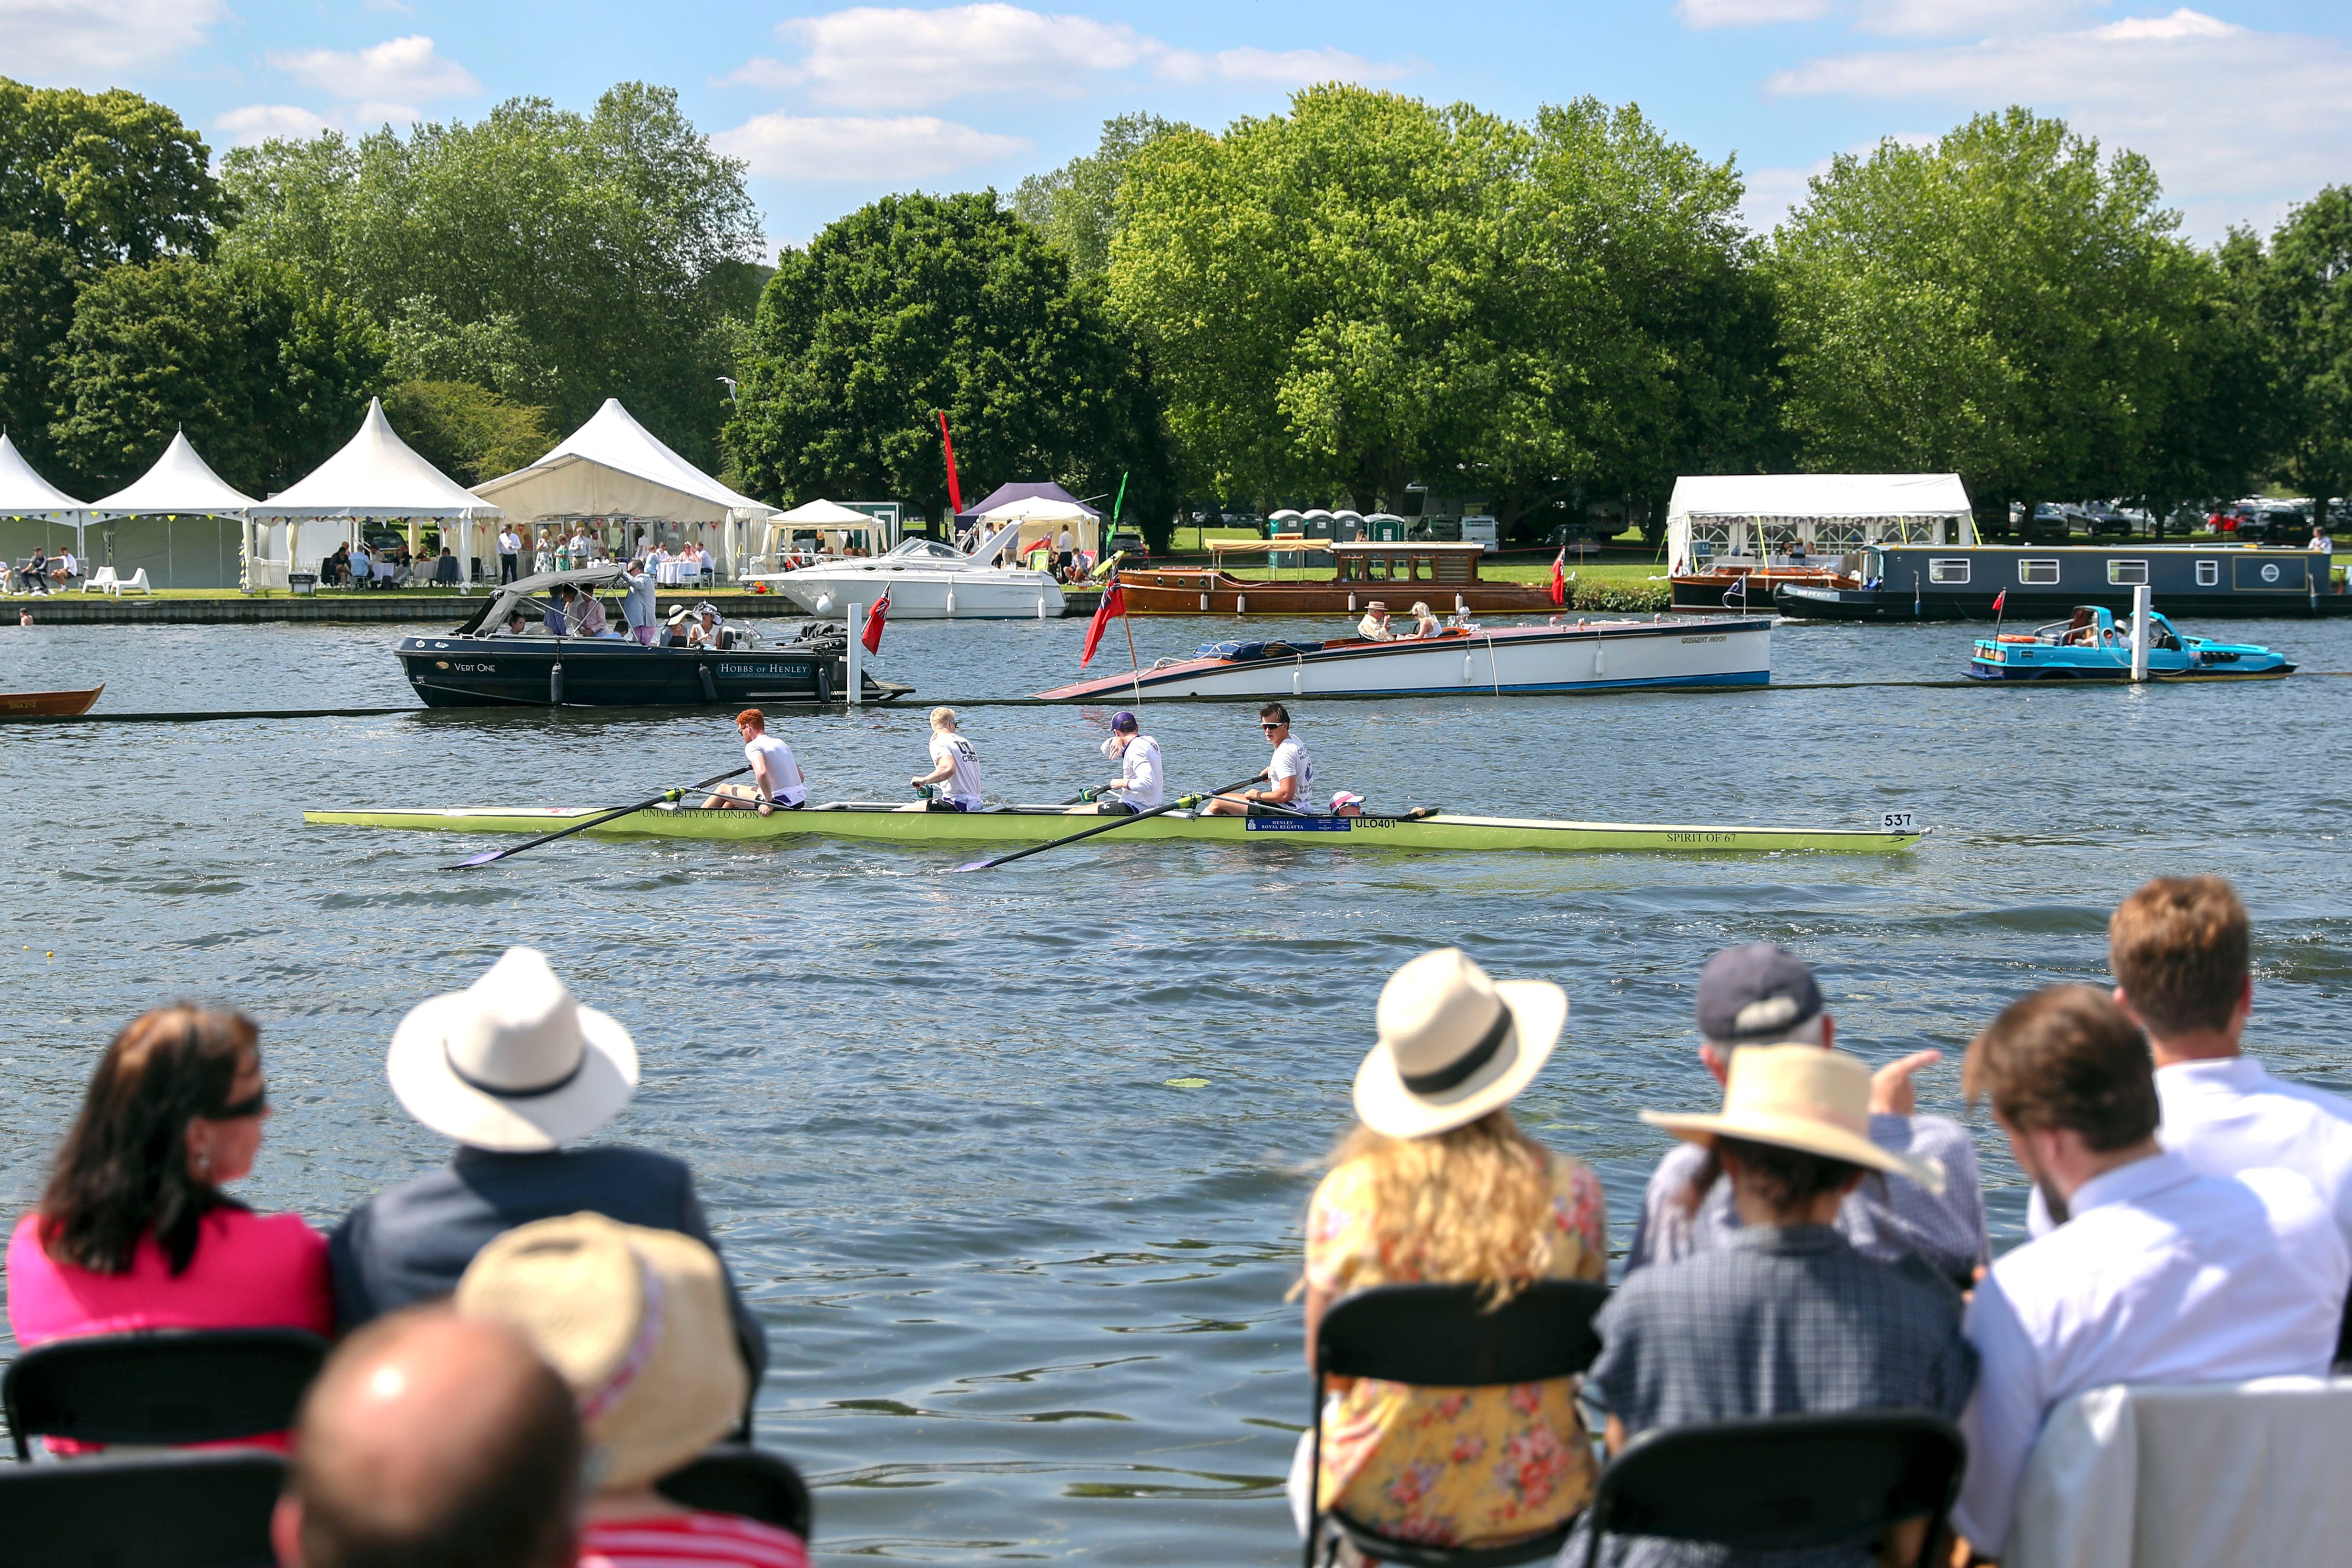 Spectators on the opening day of the 2019 Henley Royal Regatta alongside the river Thames (File photo/Steve Parsons/PA)